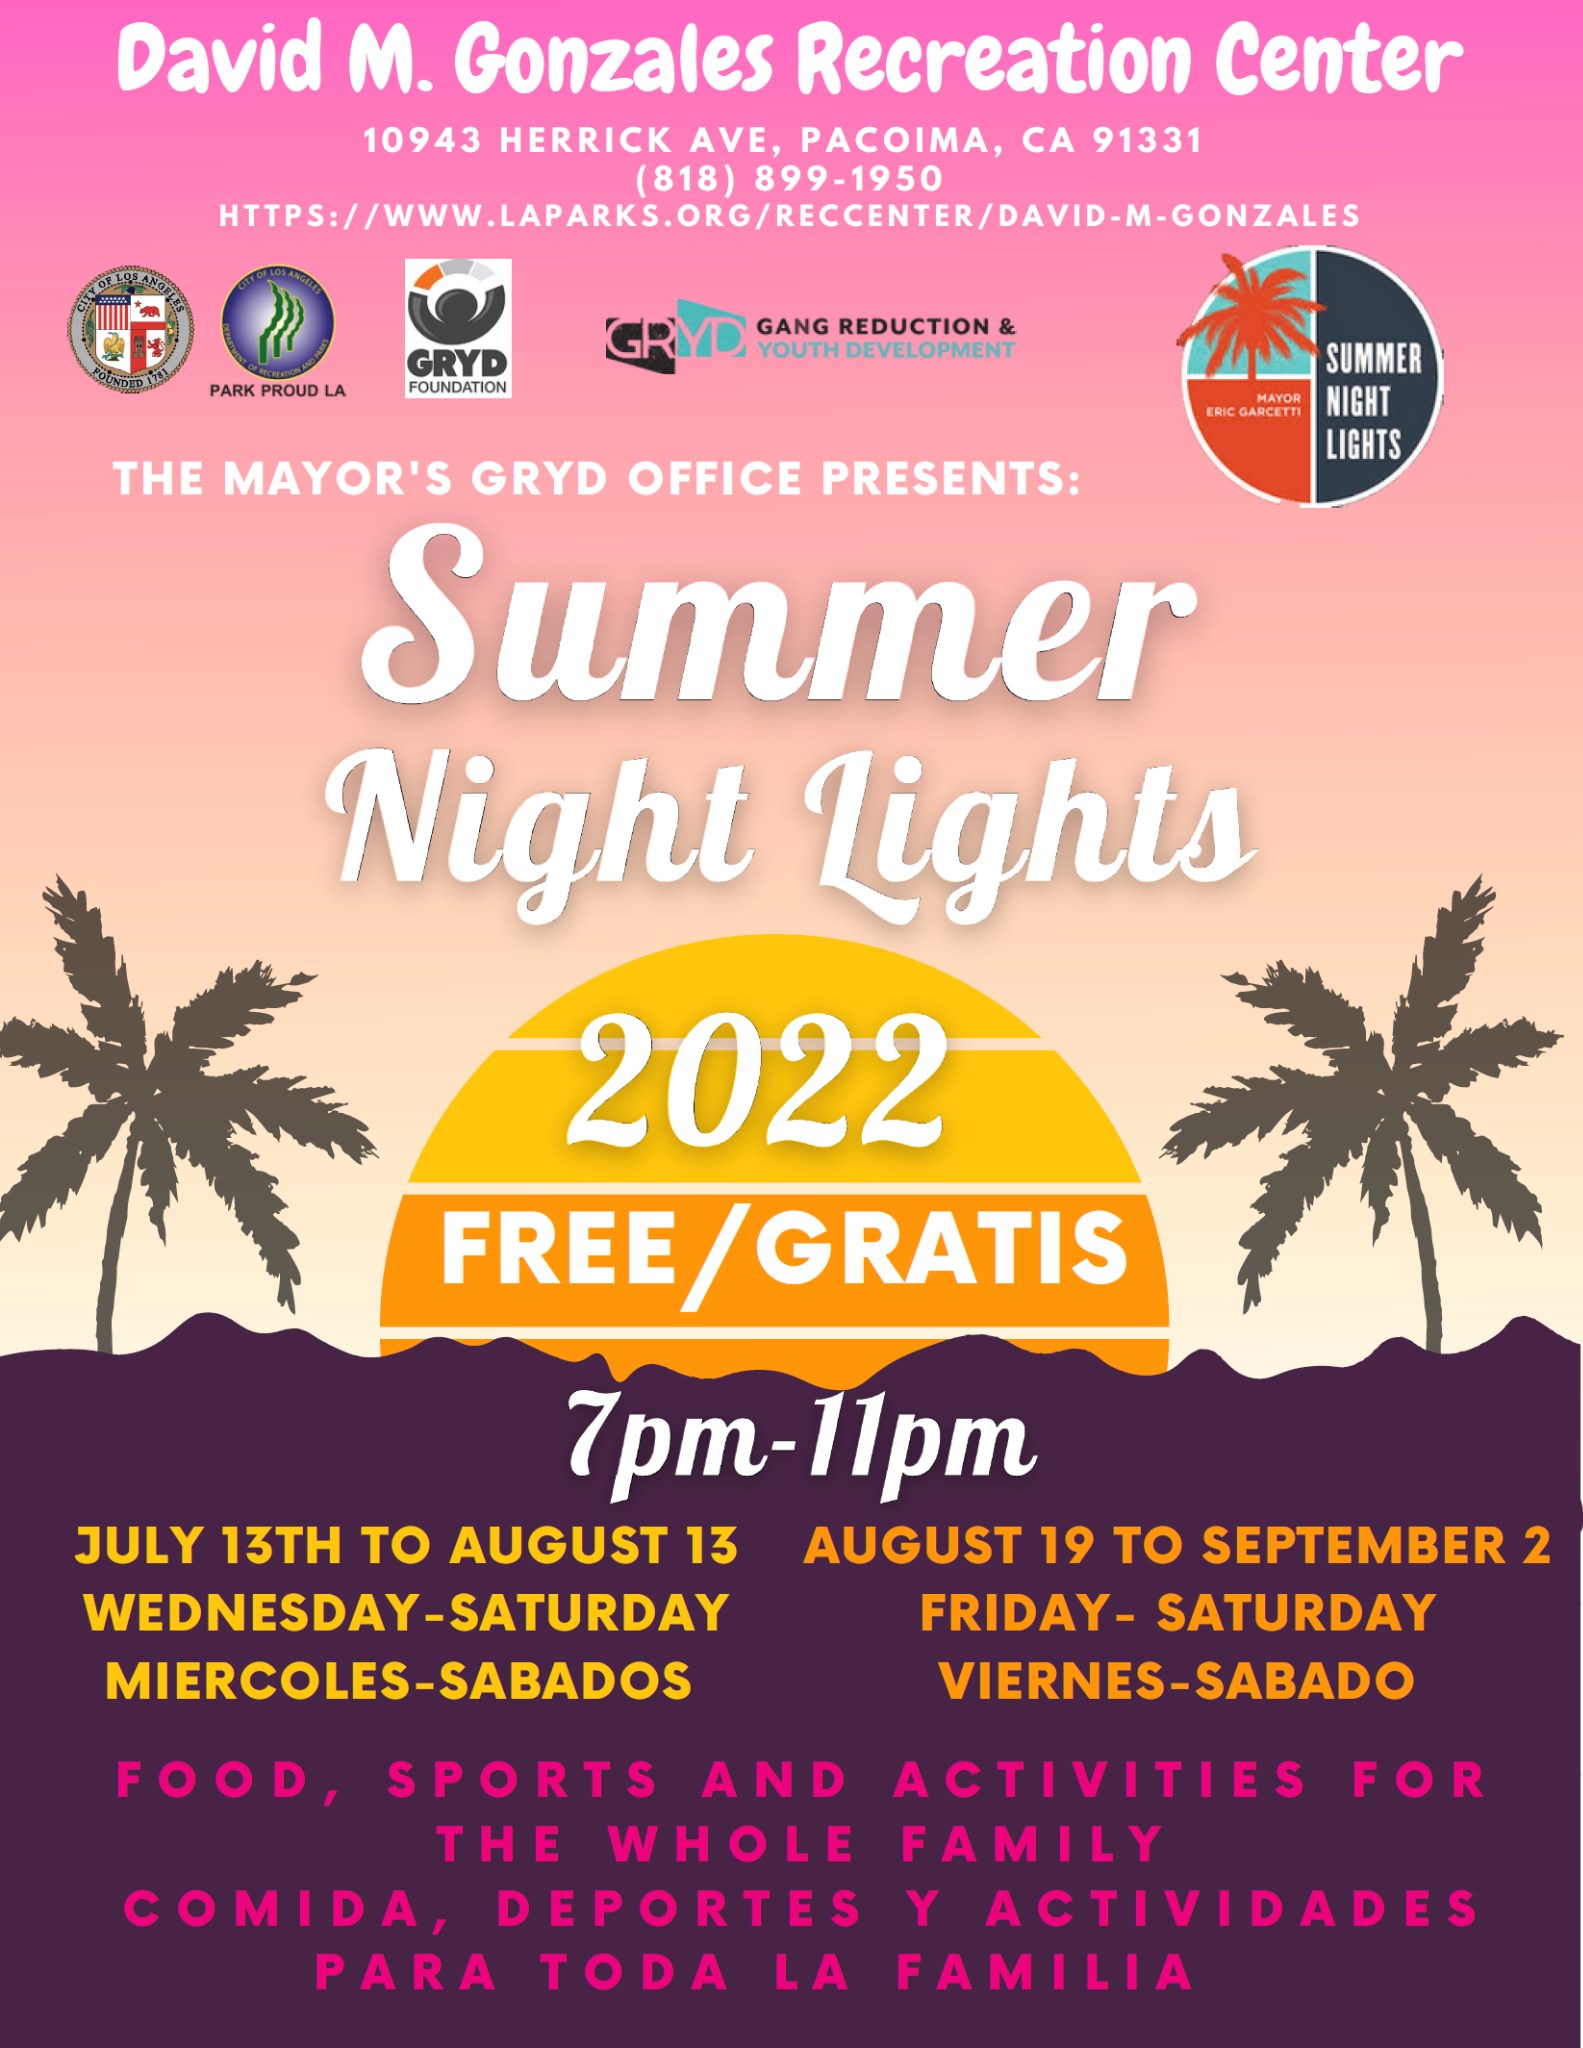 Summer Night Lights is coming to David M. Gonzales Park